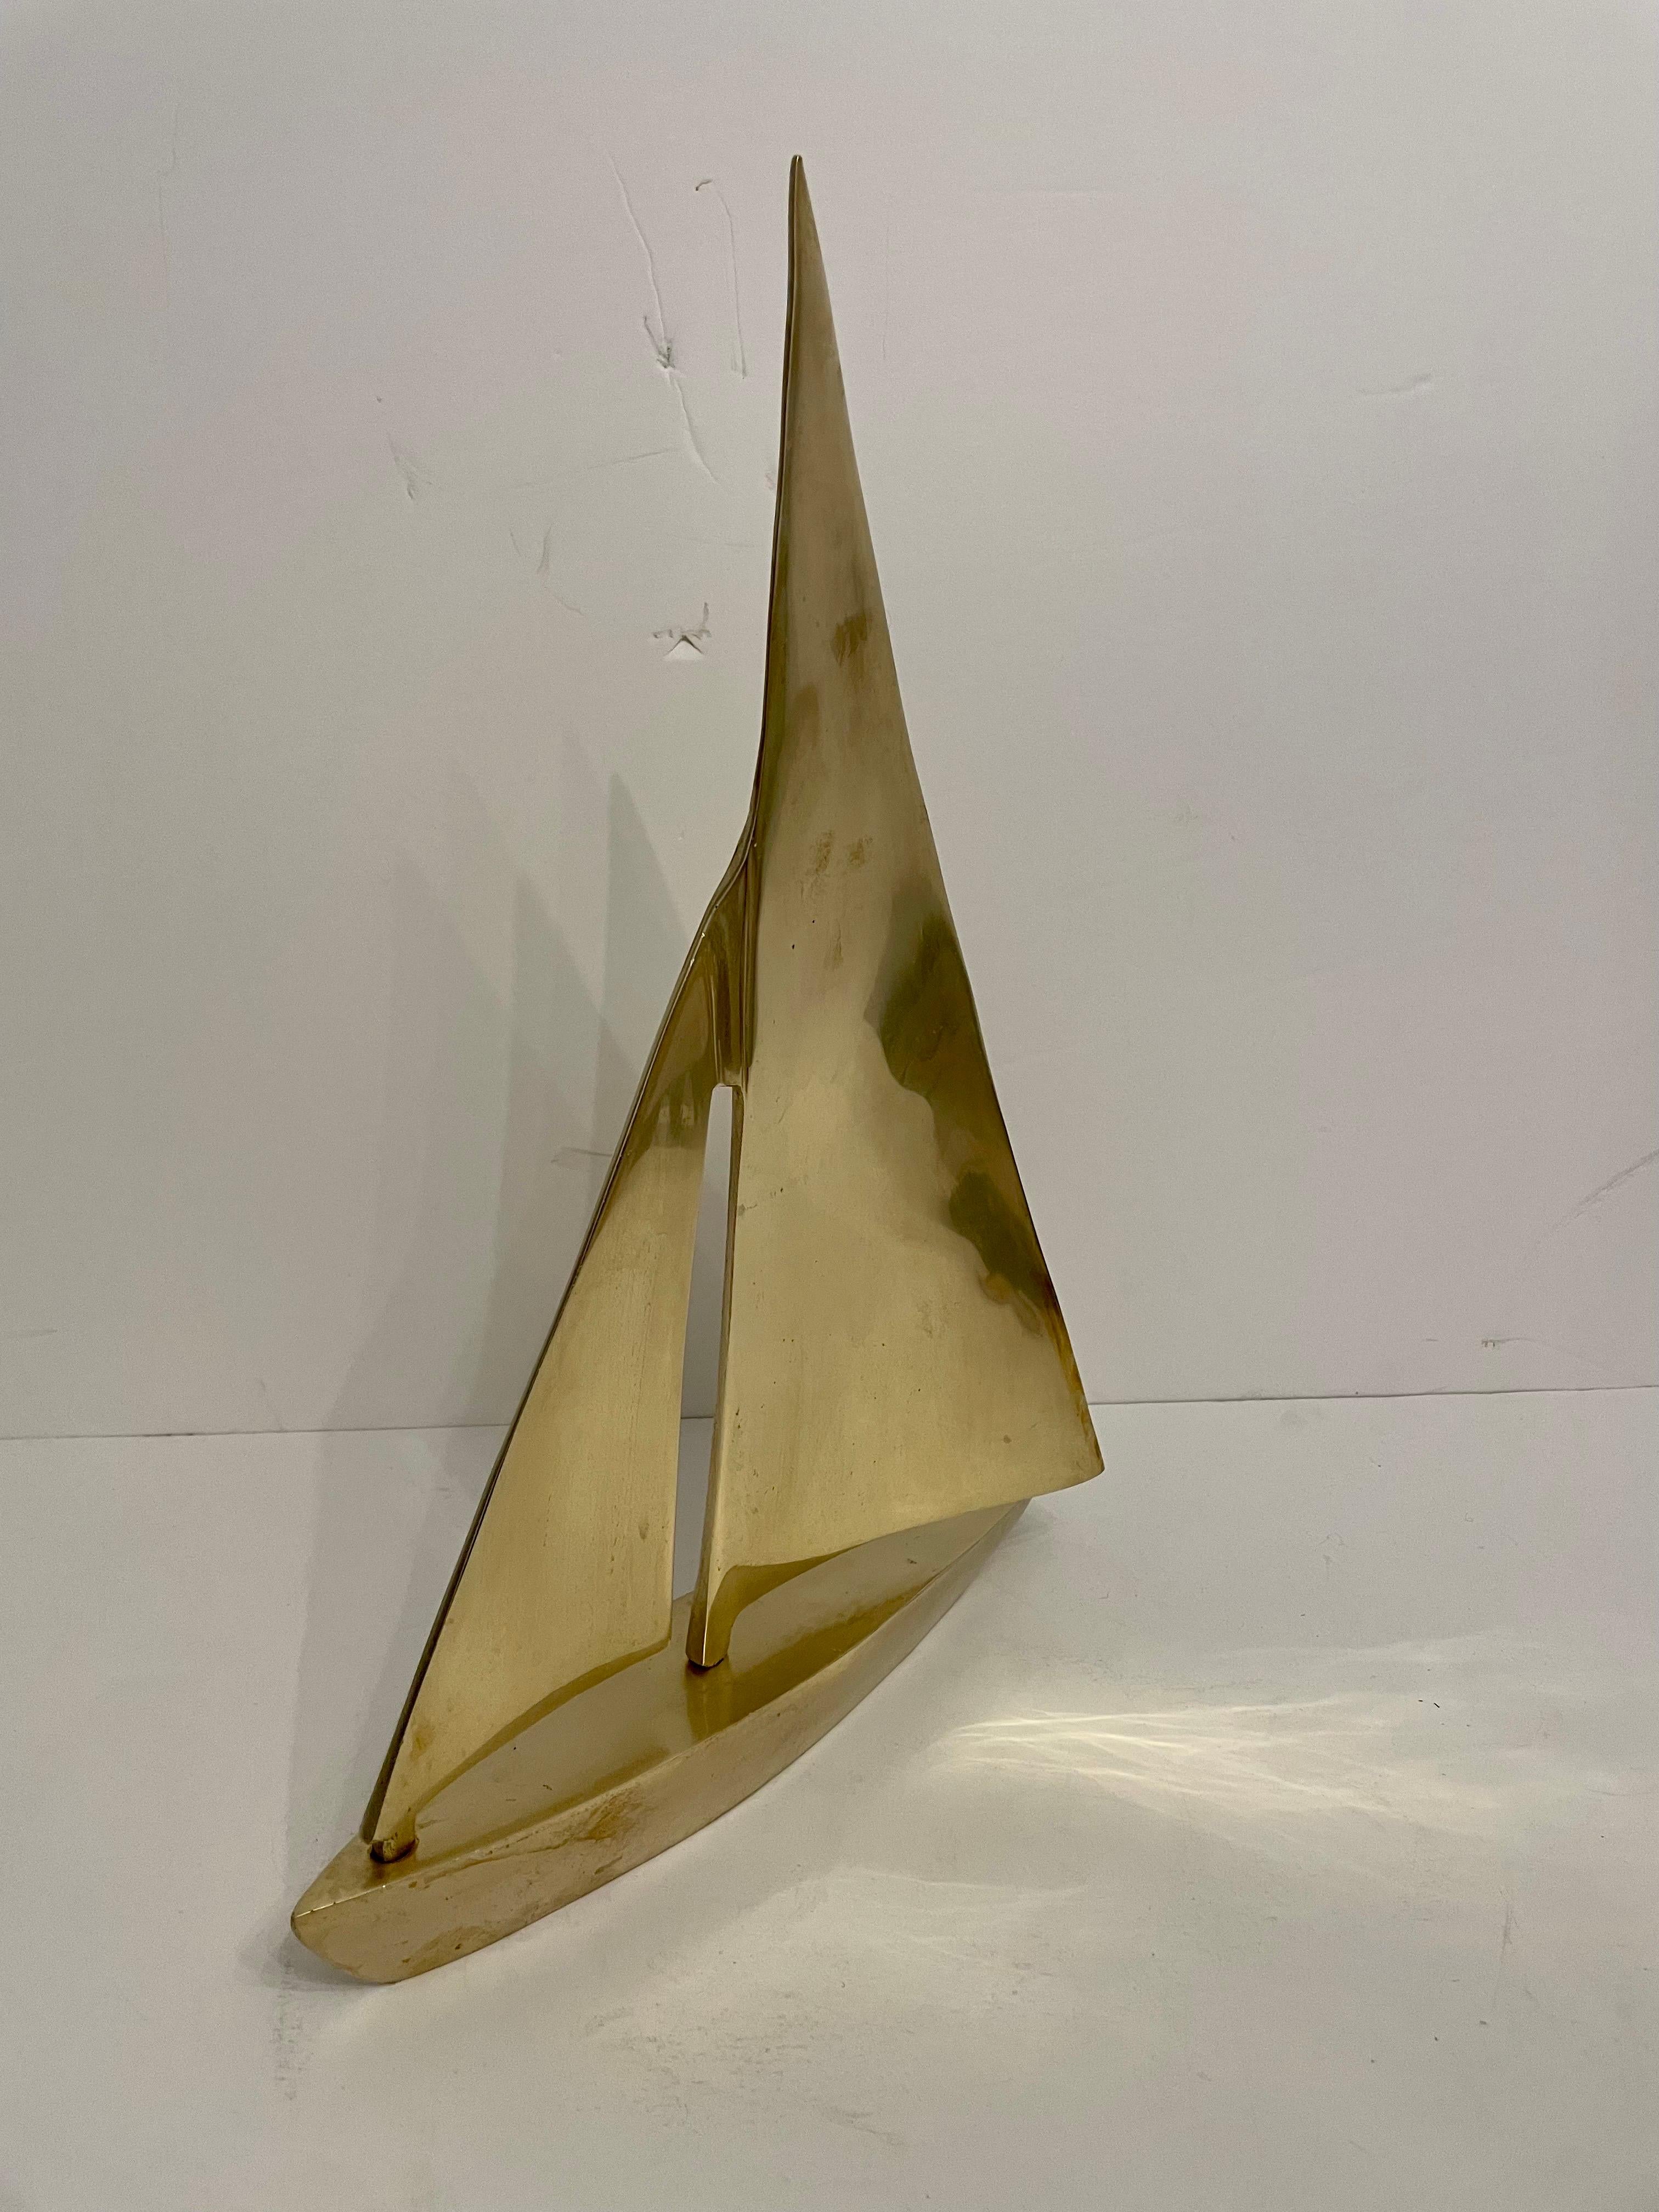 A very good quality decorative midcentury large solid brass sailboat on heavy brass base.  The brass finish lends a touch of opulence, enhancing the sculpture's aesthetic appeal and adding a warm, inviting ambiance to any space. A great  addition to